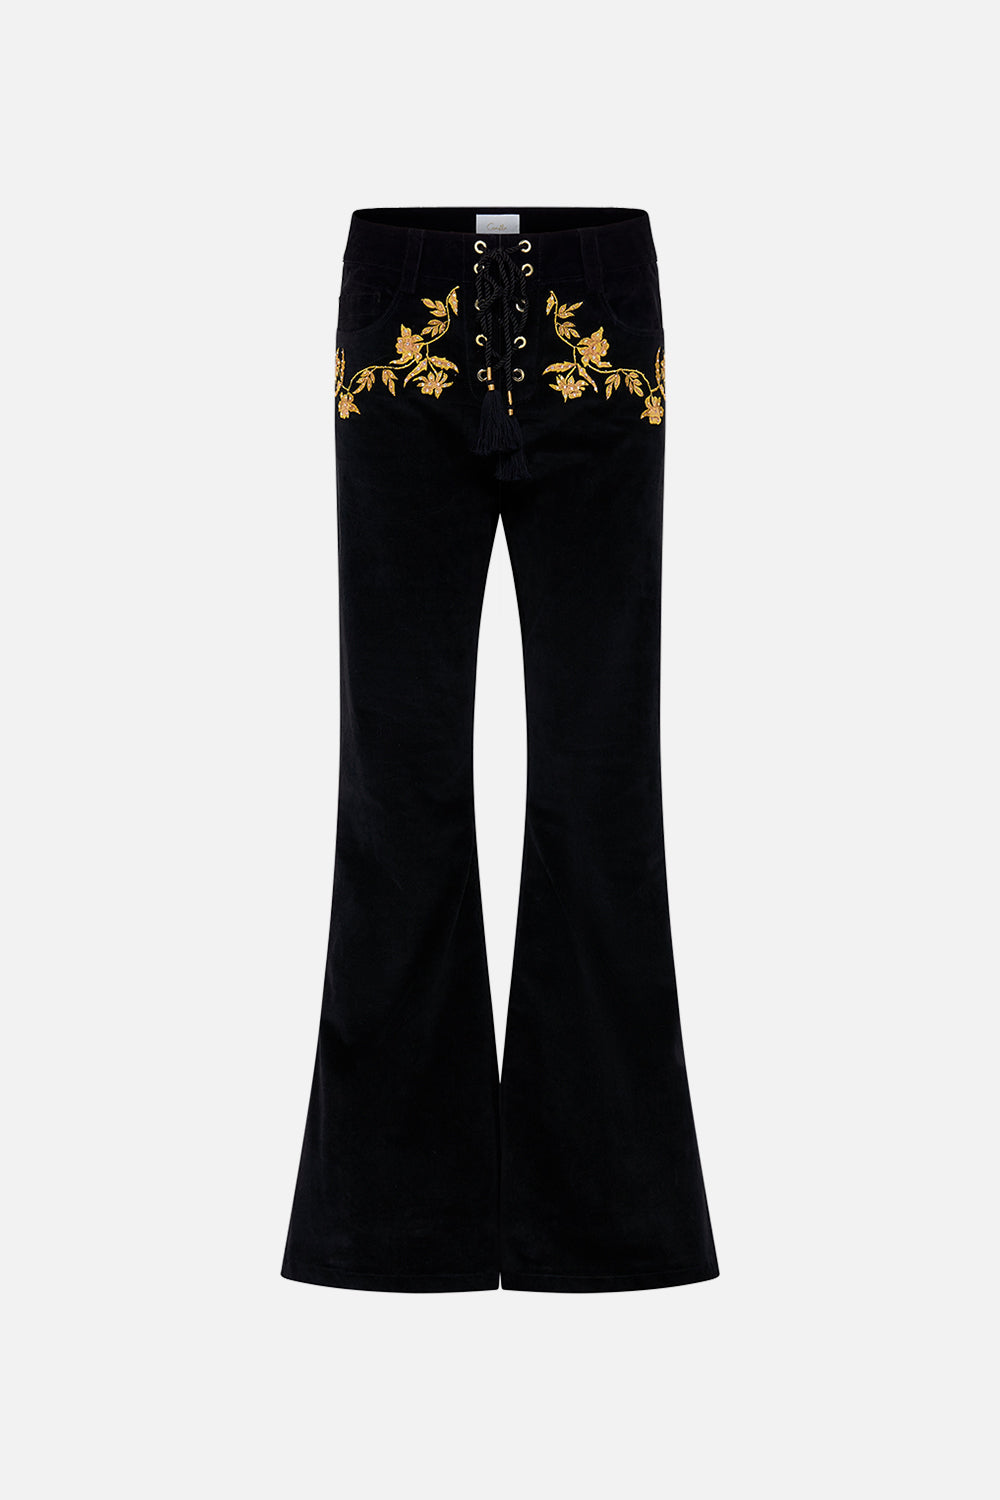 CAMILLA floral Eyelet Front Pant in Stitched in Time